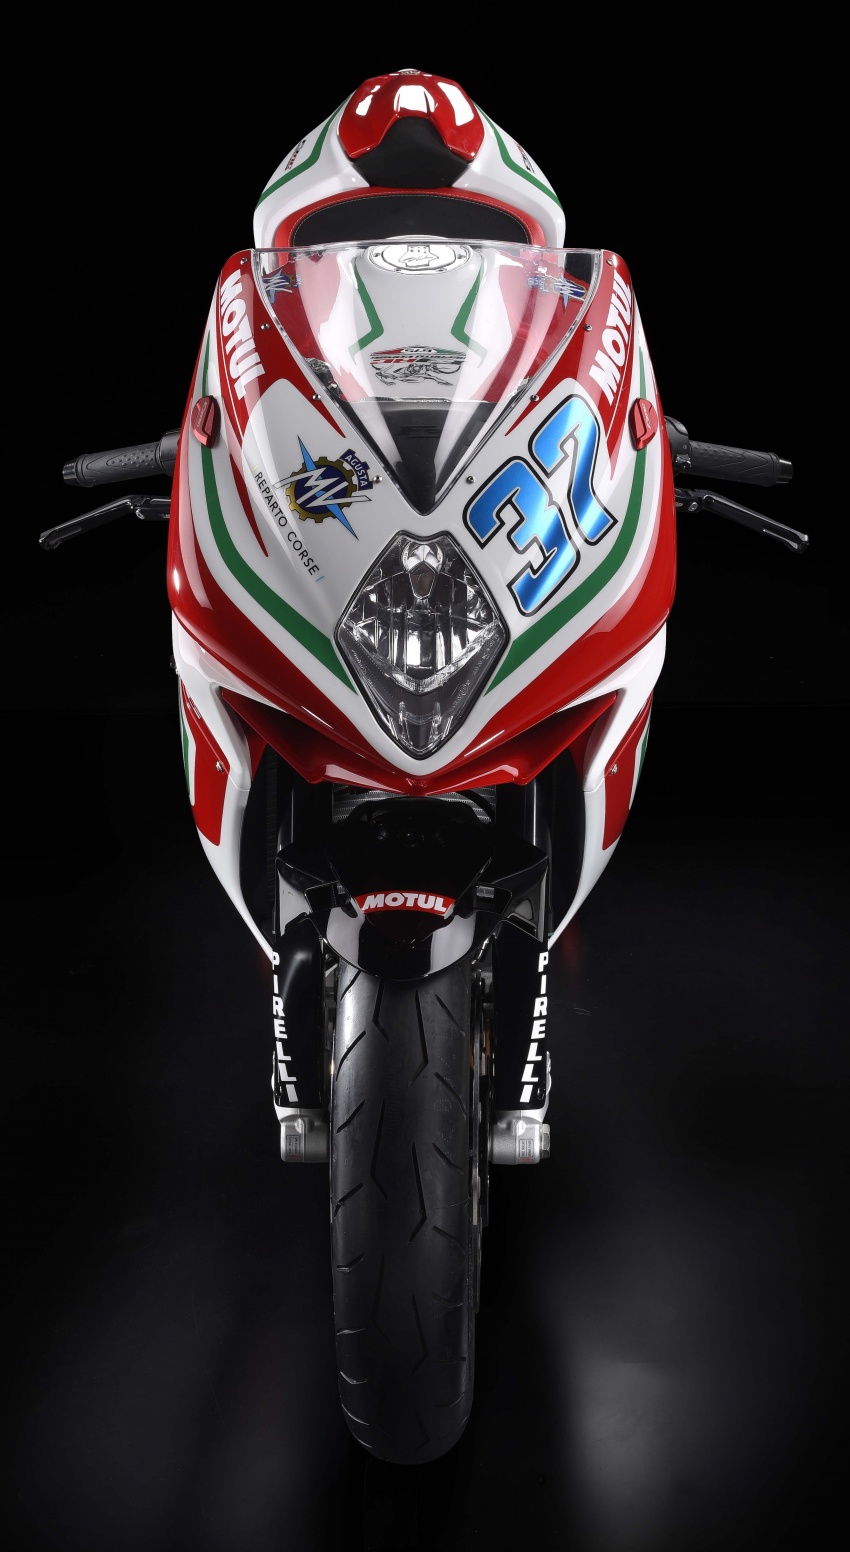 GALLERY: 2017 MV Agusta F3 675 RC limited edition – only 350 units worldwide, RM66,161 in the UK 562797